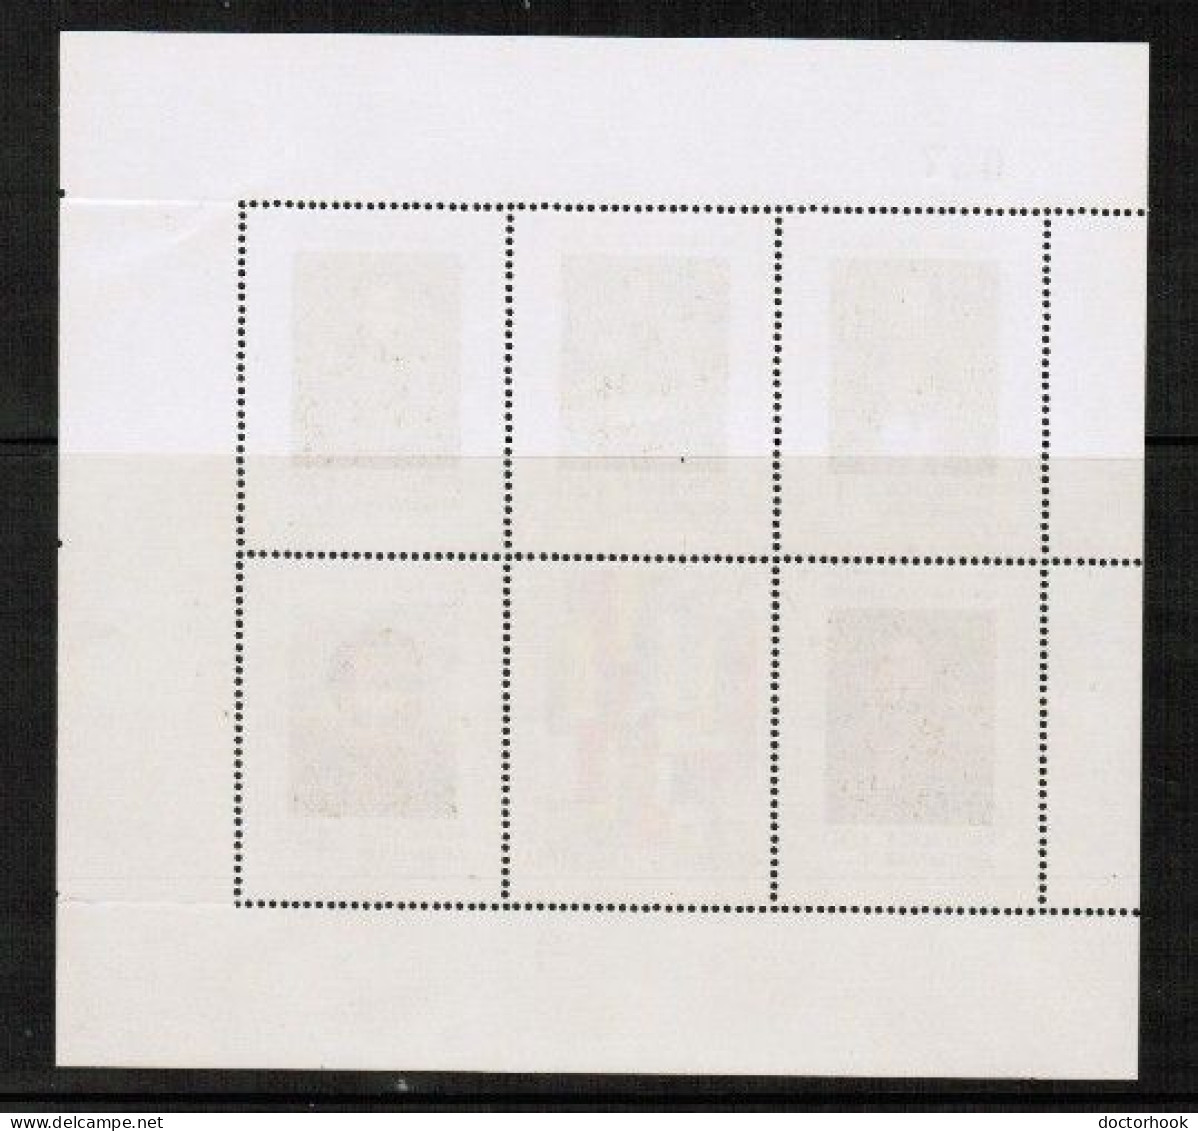 ARGENTINA   Scott # 1052** MINT NH SHEET Of 6 (CONDITION AS PER SCAN) (BK-2-21) - Hojas Bloque